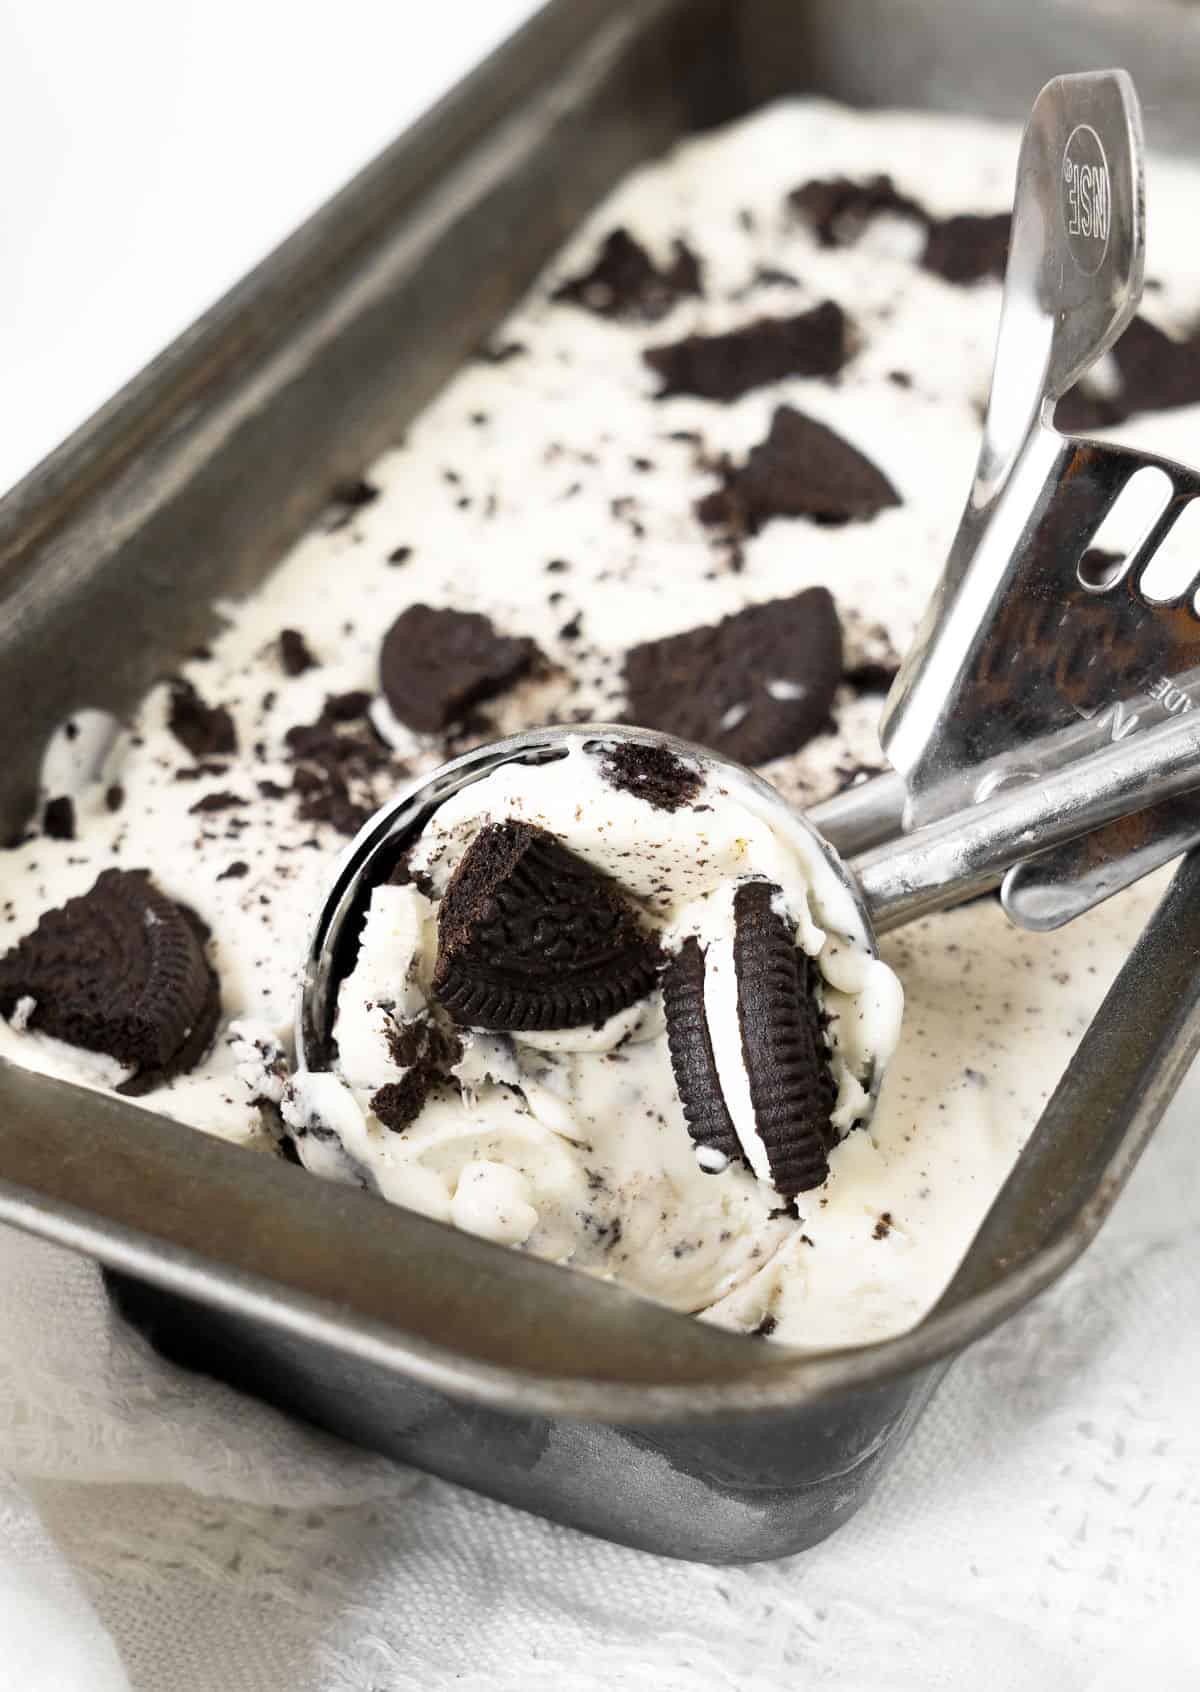 Cookies and cream ice cream in a metal loaf pan with a scoop on a white cloth and background.